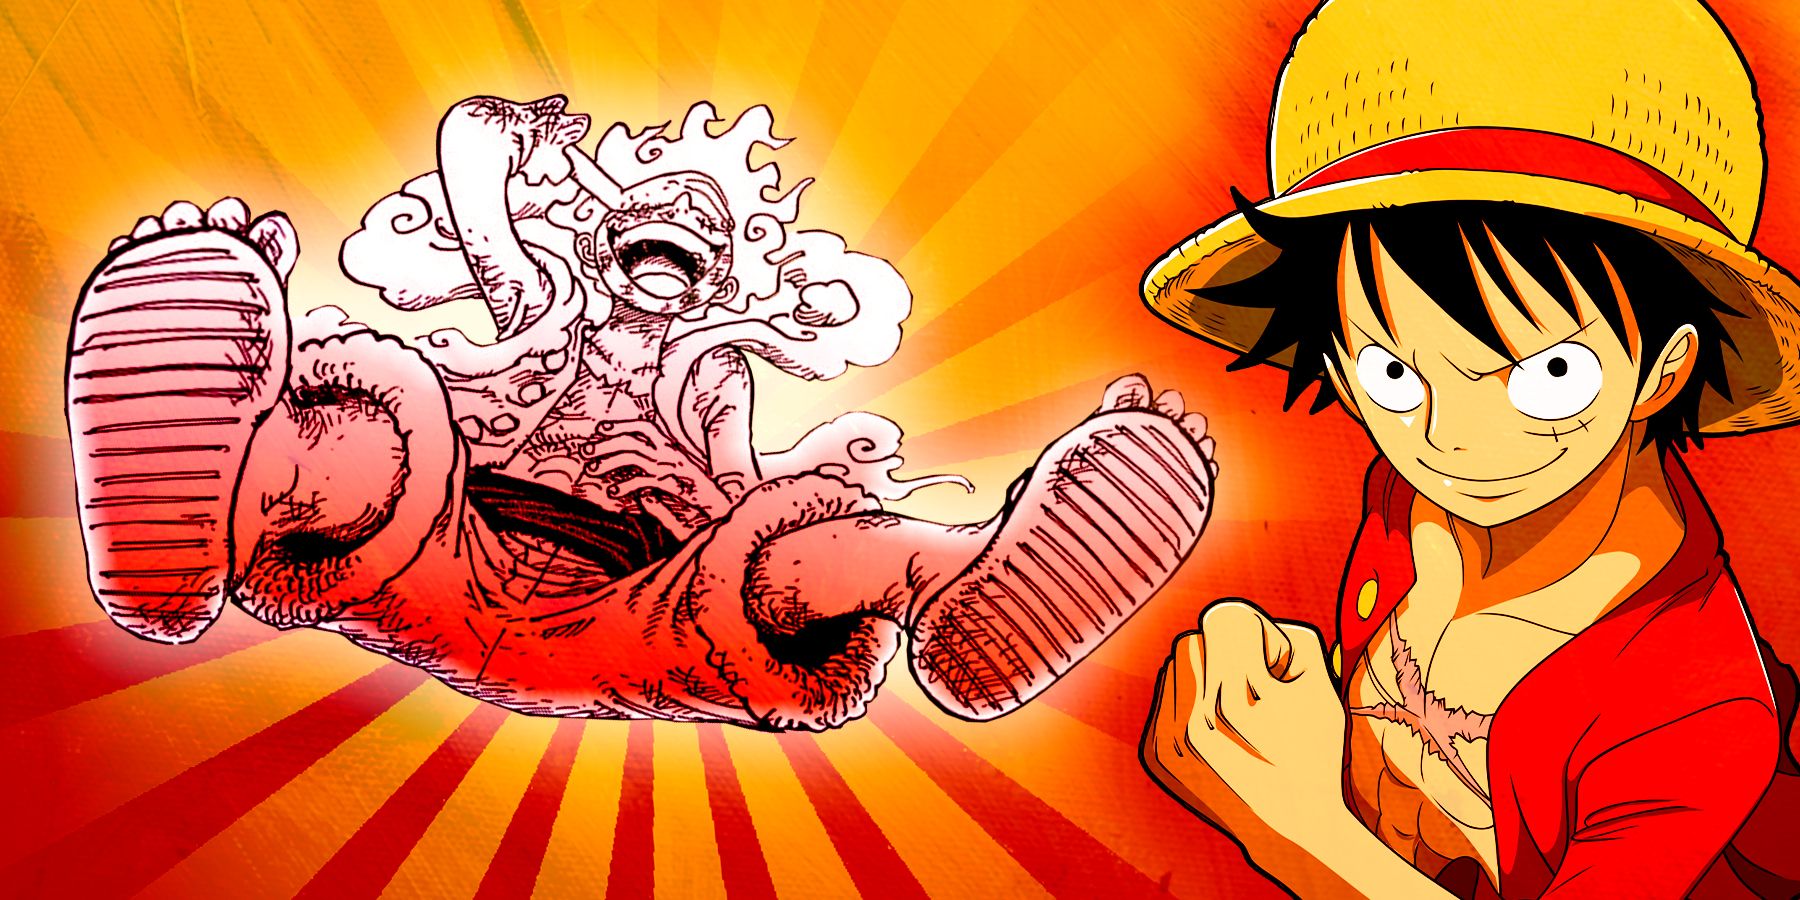 One Piece: A Complete List of Luffy's Gears (Explained)